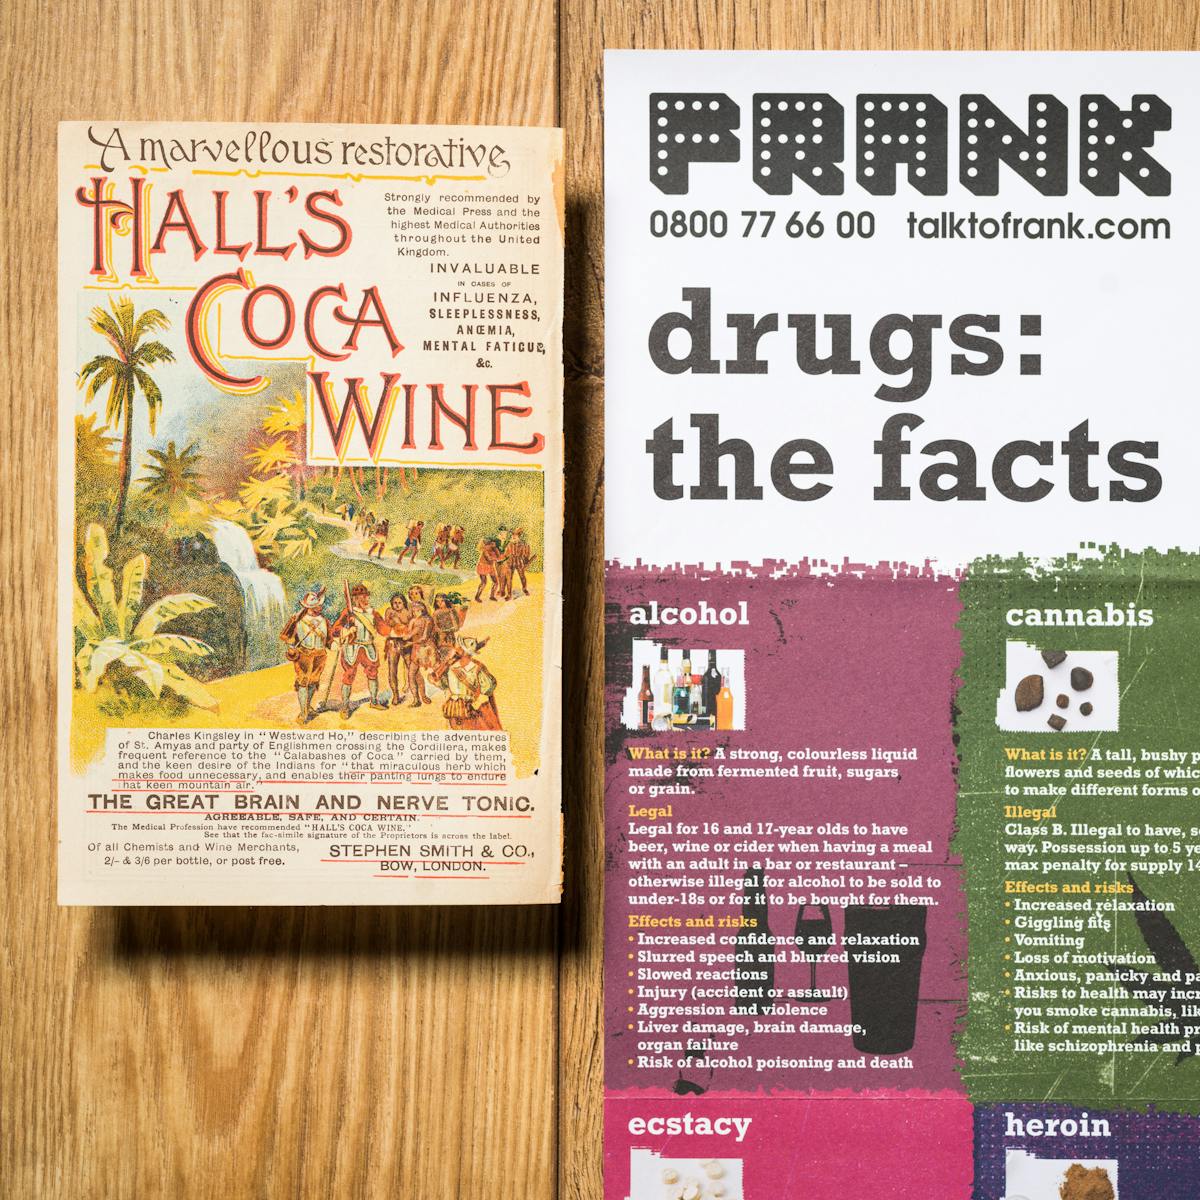 Photograph showing two items of ephemera from the Wellcome library. Photographed on a  wooden table, one item is promoting Hall's Coca Wine and reads "A marvellous restorative". The other is part of a drug awareness poster from the 1980/90s titled "Frank, drugs: the facts".